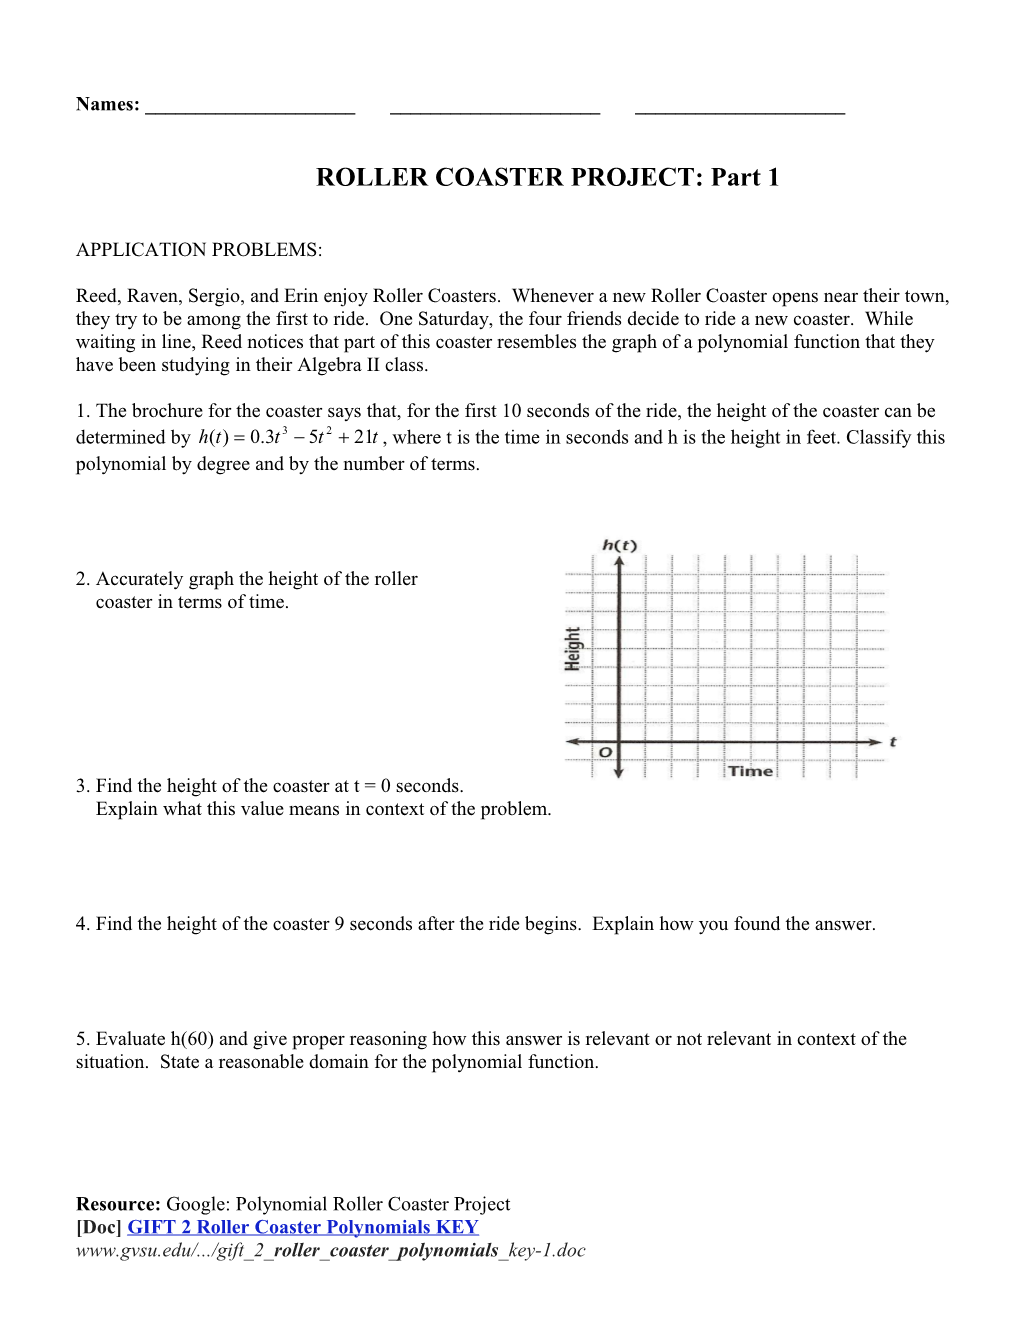 ROLLER COASTER PROJECT: Part 1